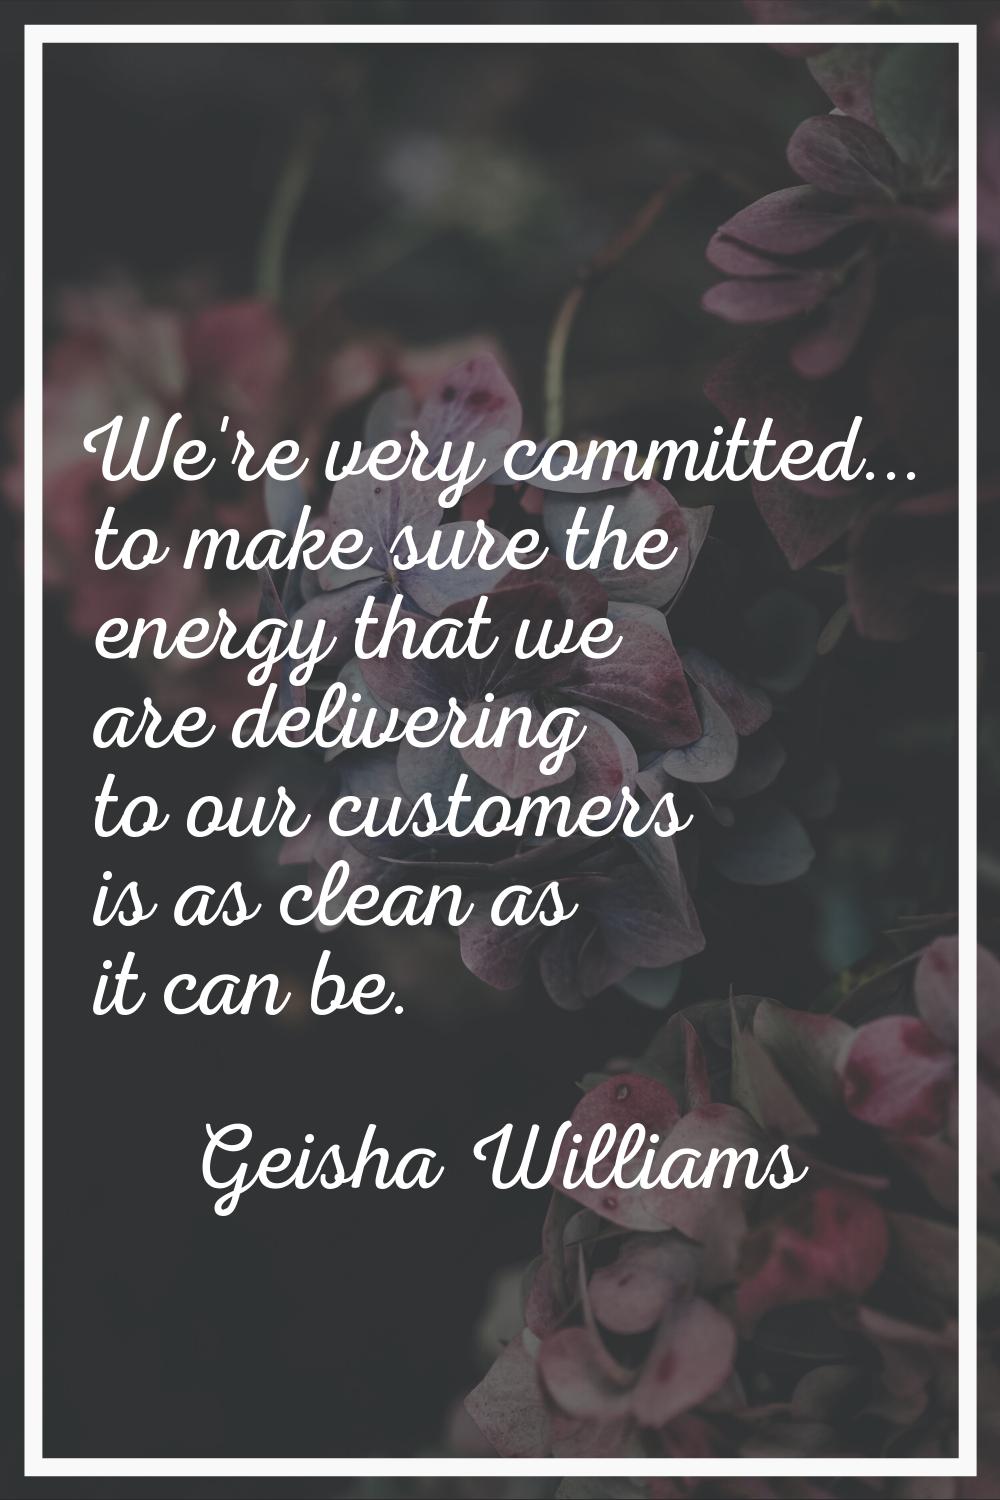 We're very committed... to make sure the energy that we are delivering to our customers is as clean